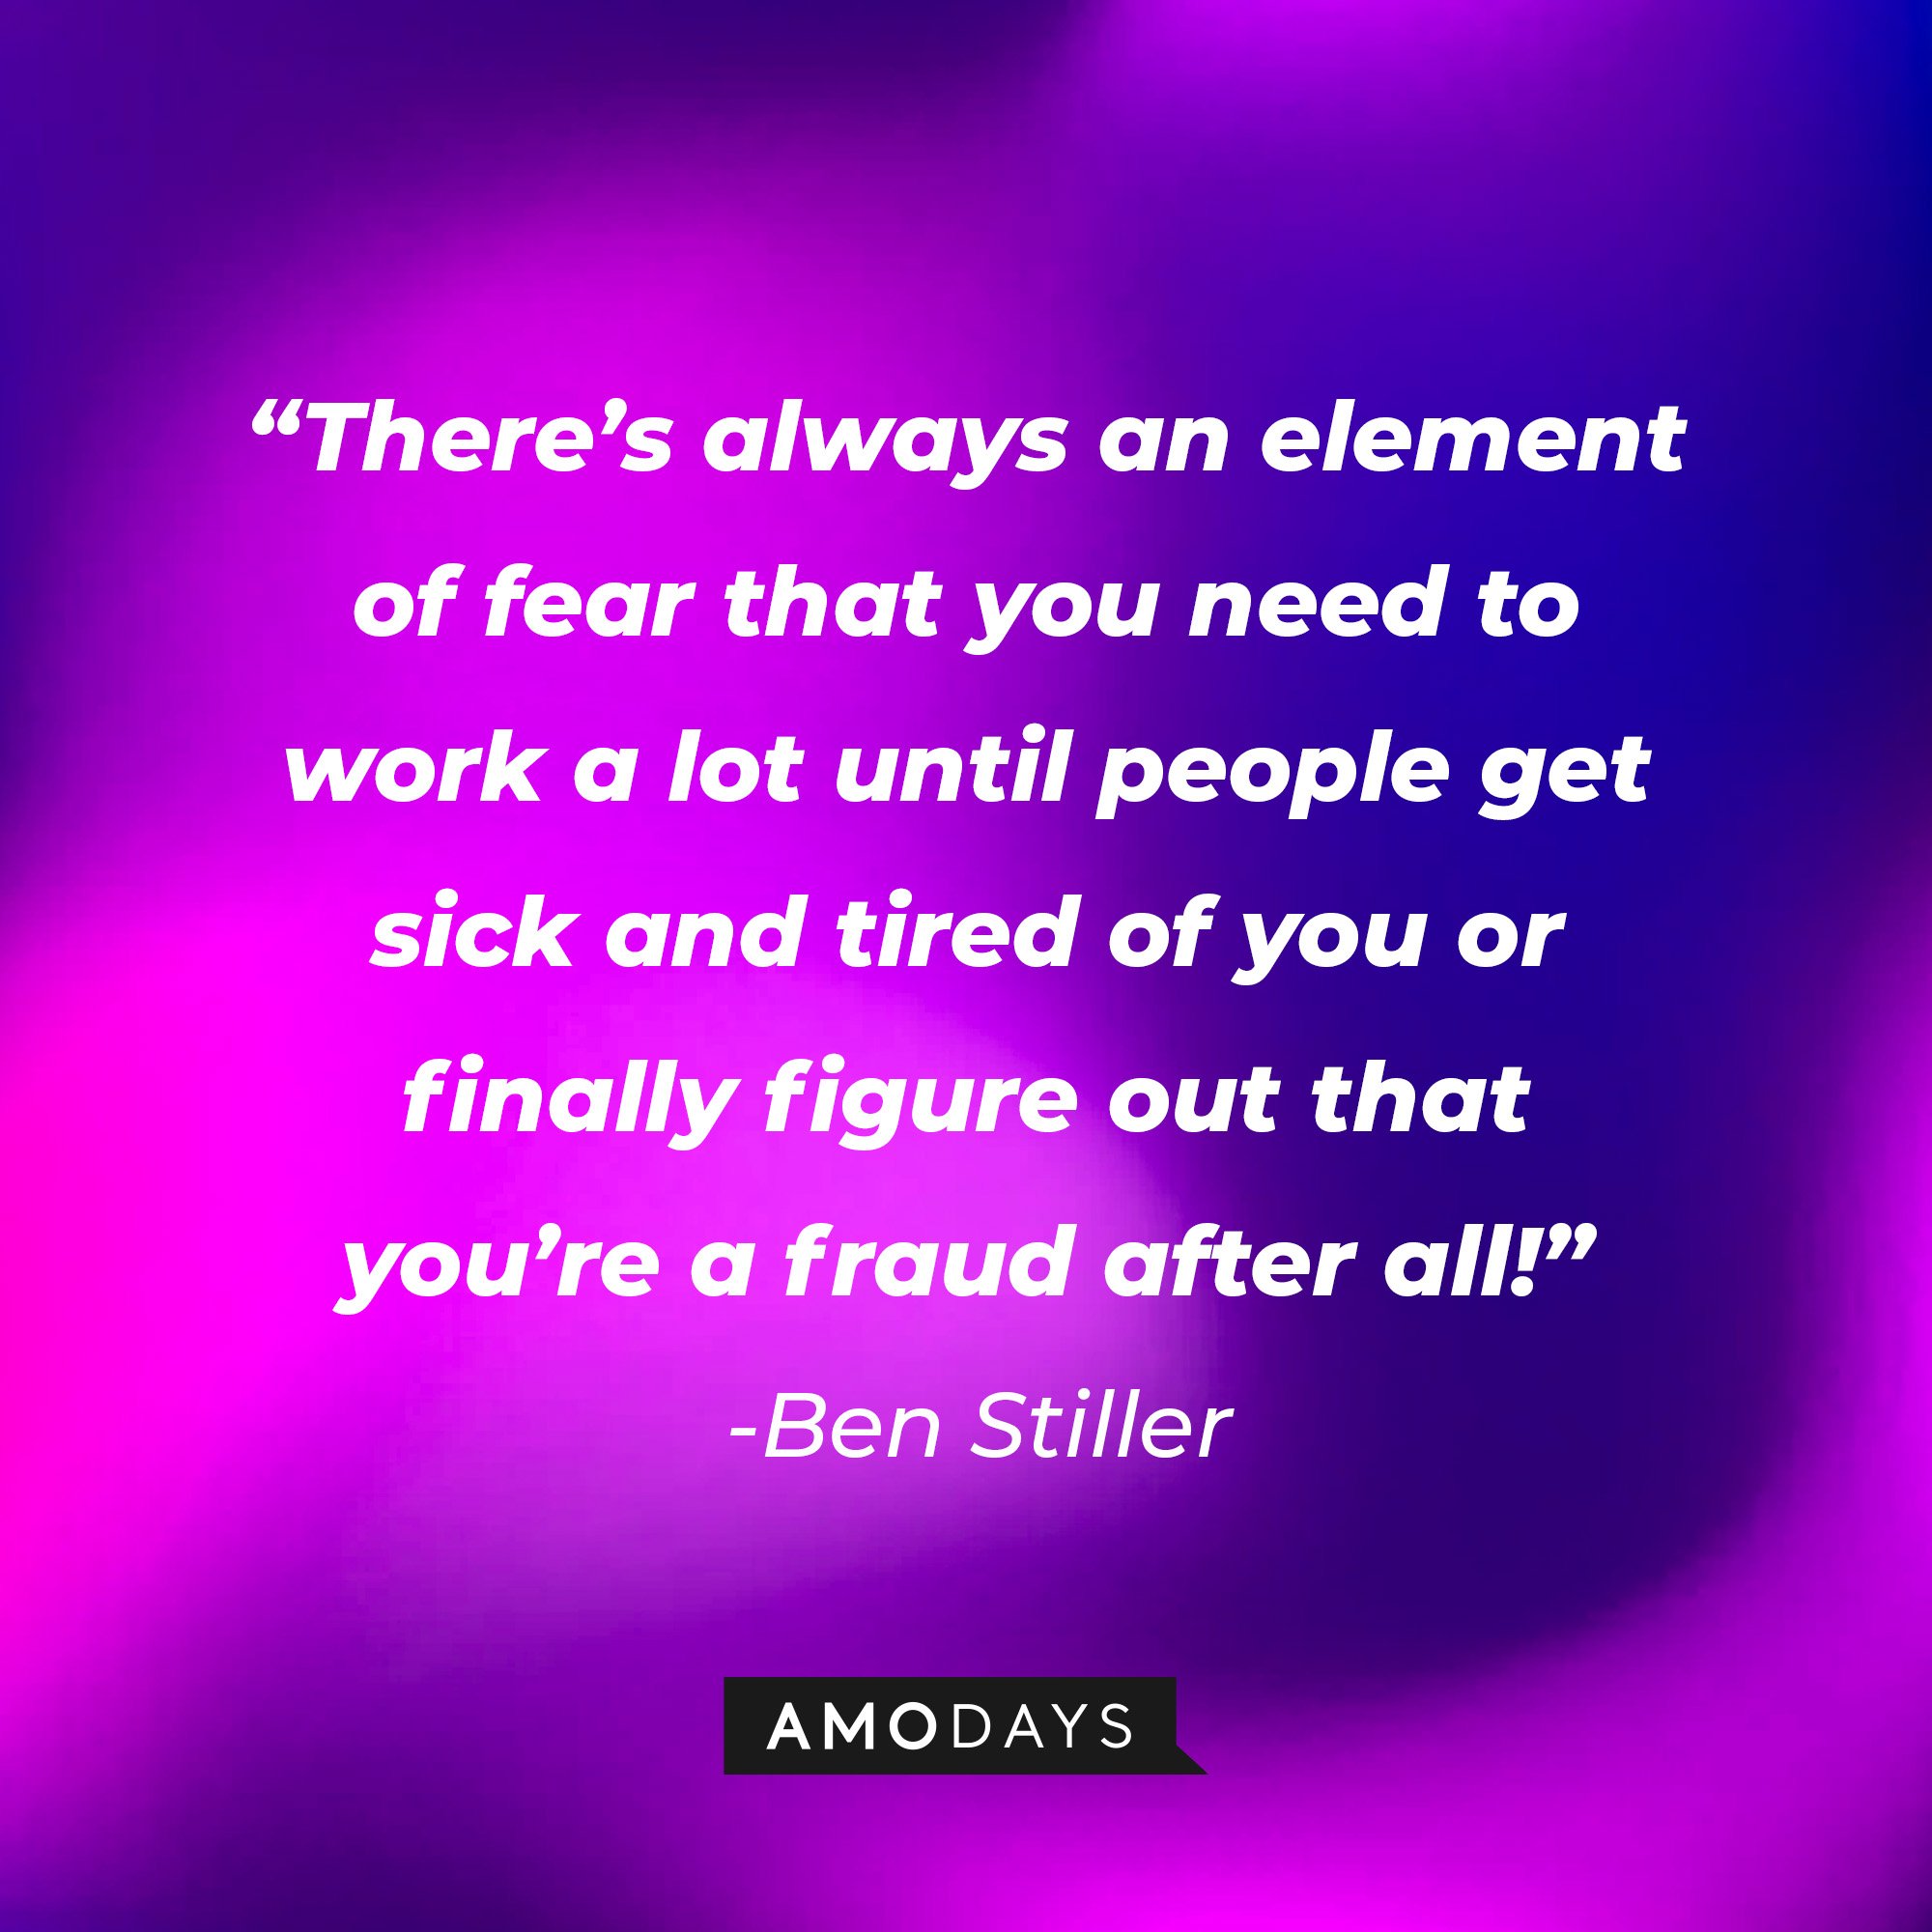  Ben Stiller's quote: “There’s always an element of fear that you need to work a lot until people get sick and tired of you or finally figure out that you’re a fraud after all!” | Image: AmoDays